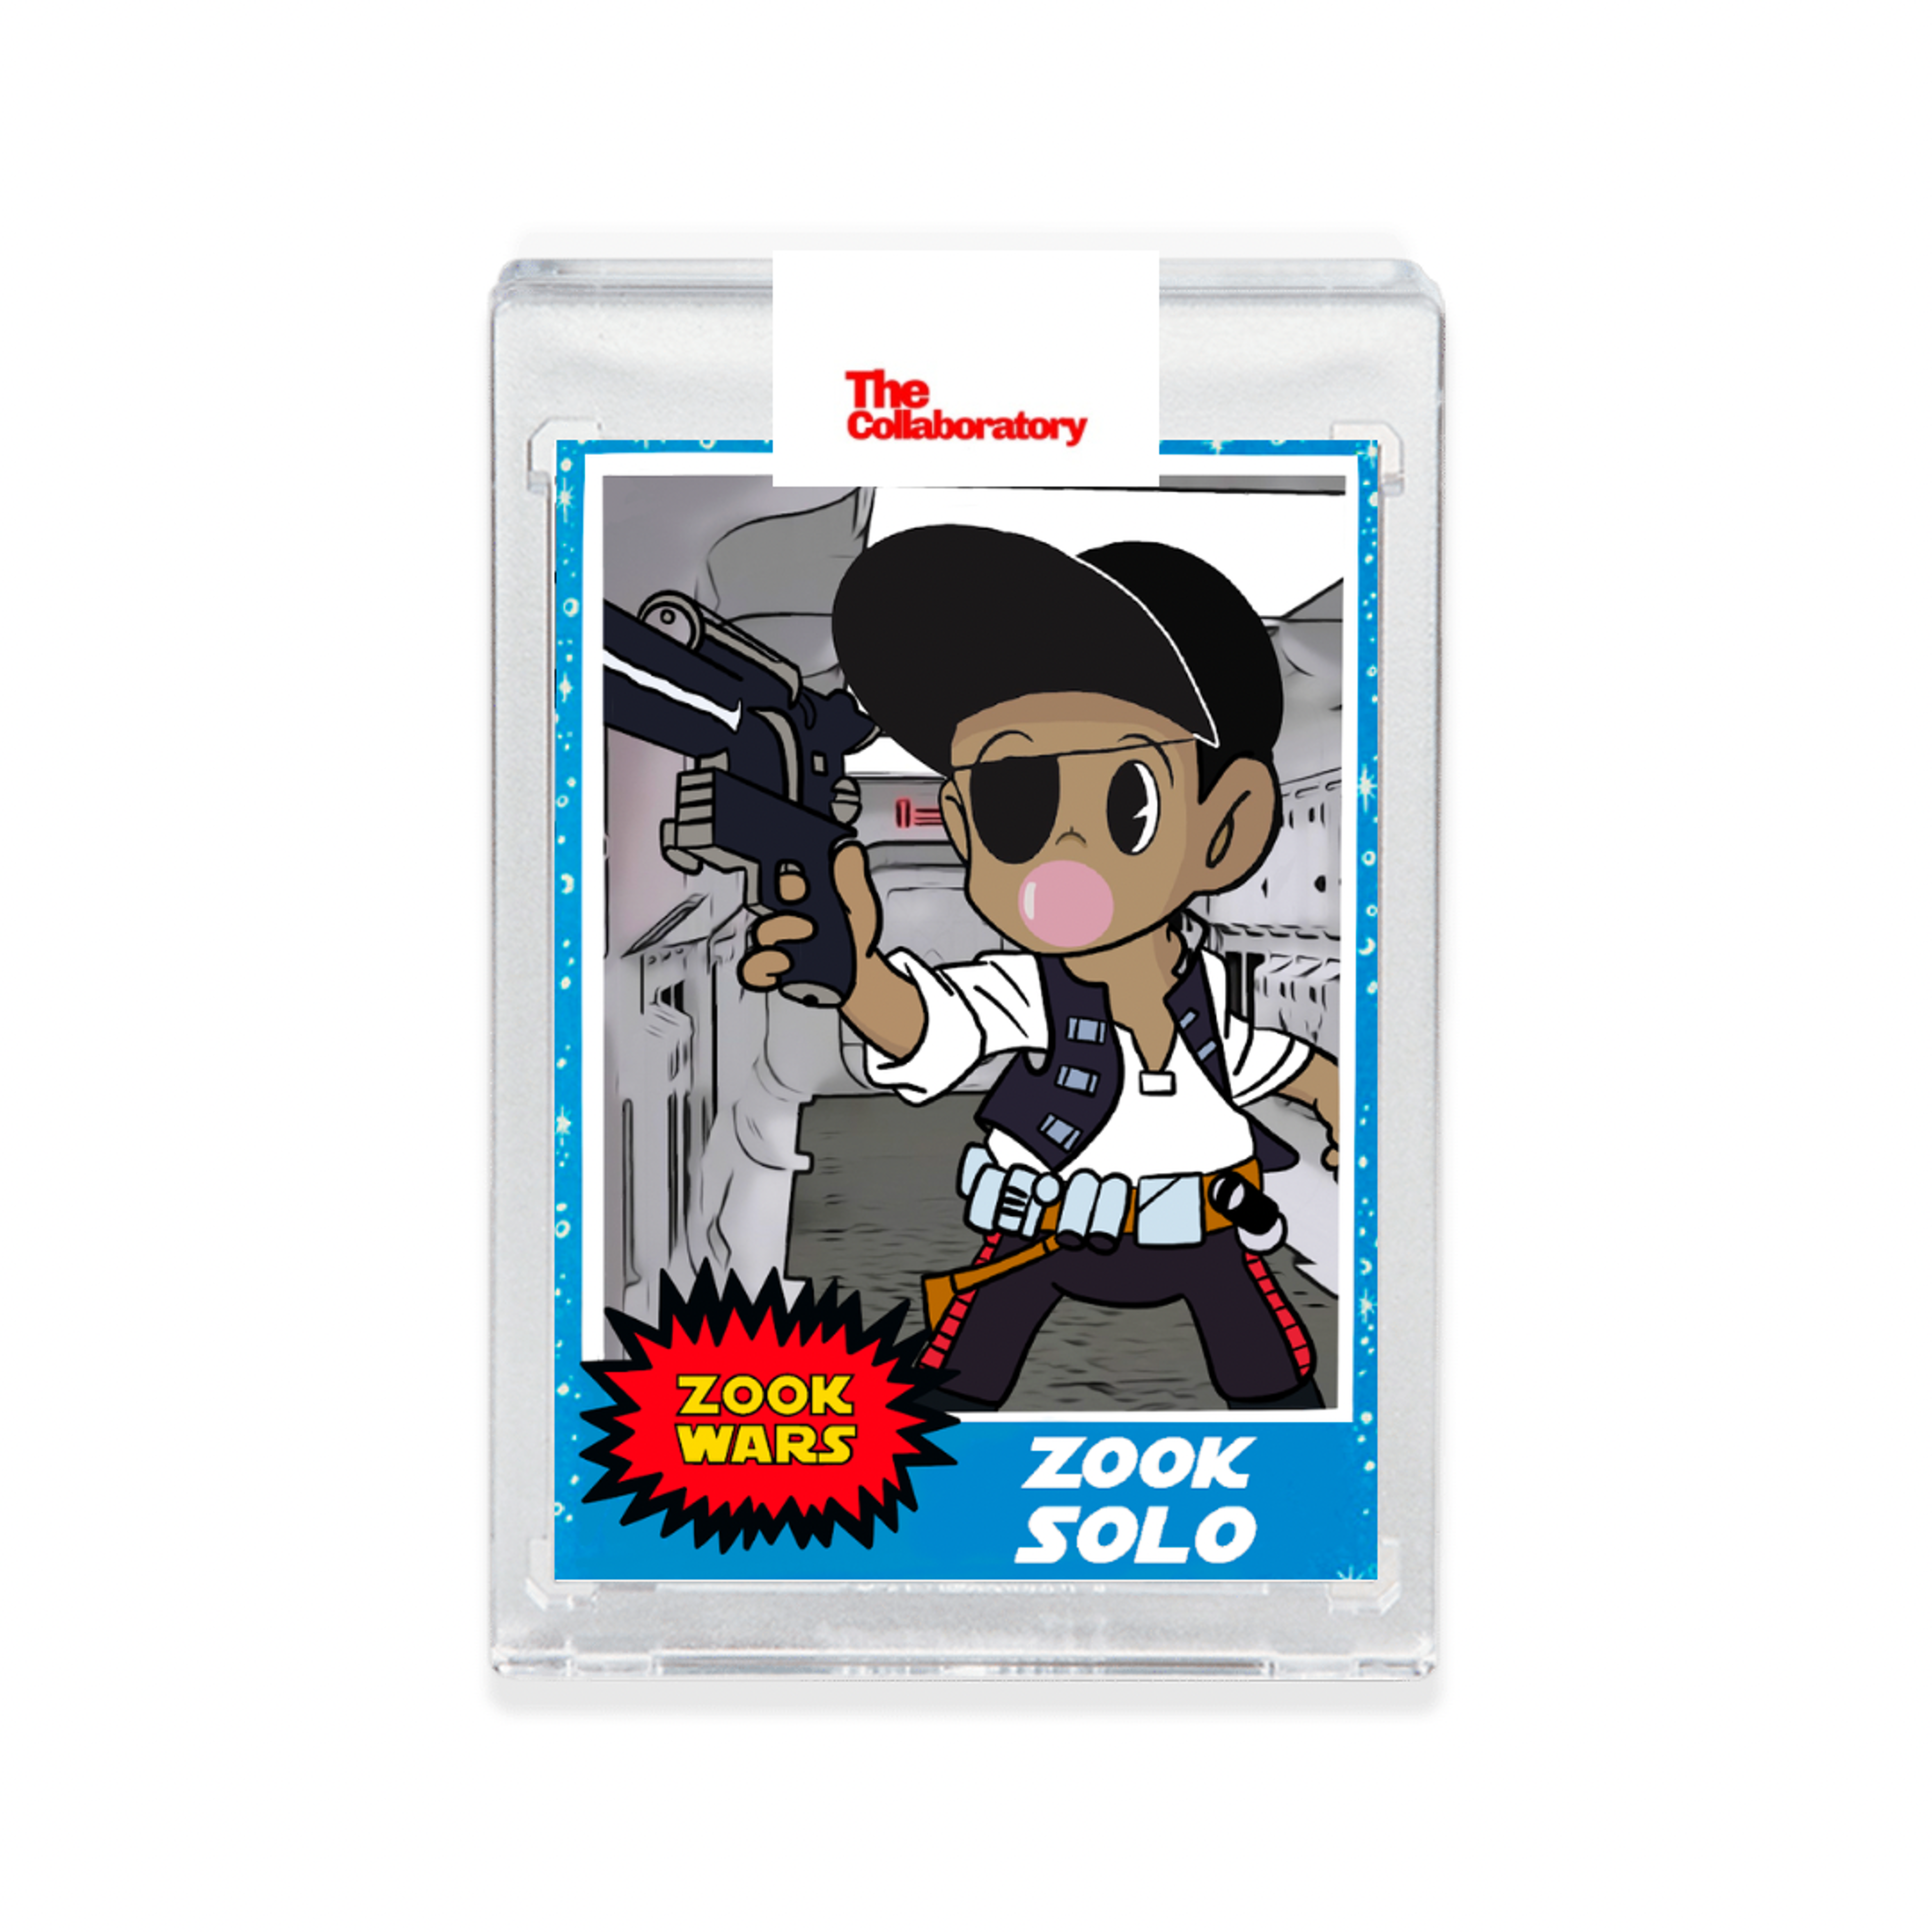 Zook Solo “Double Sided Mini Print”